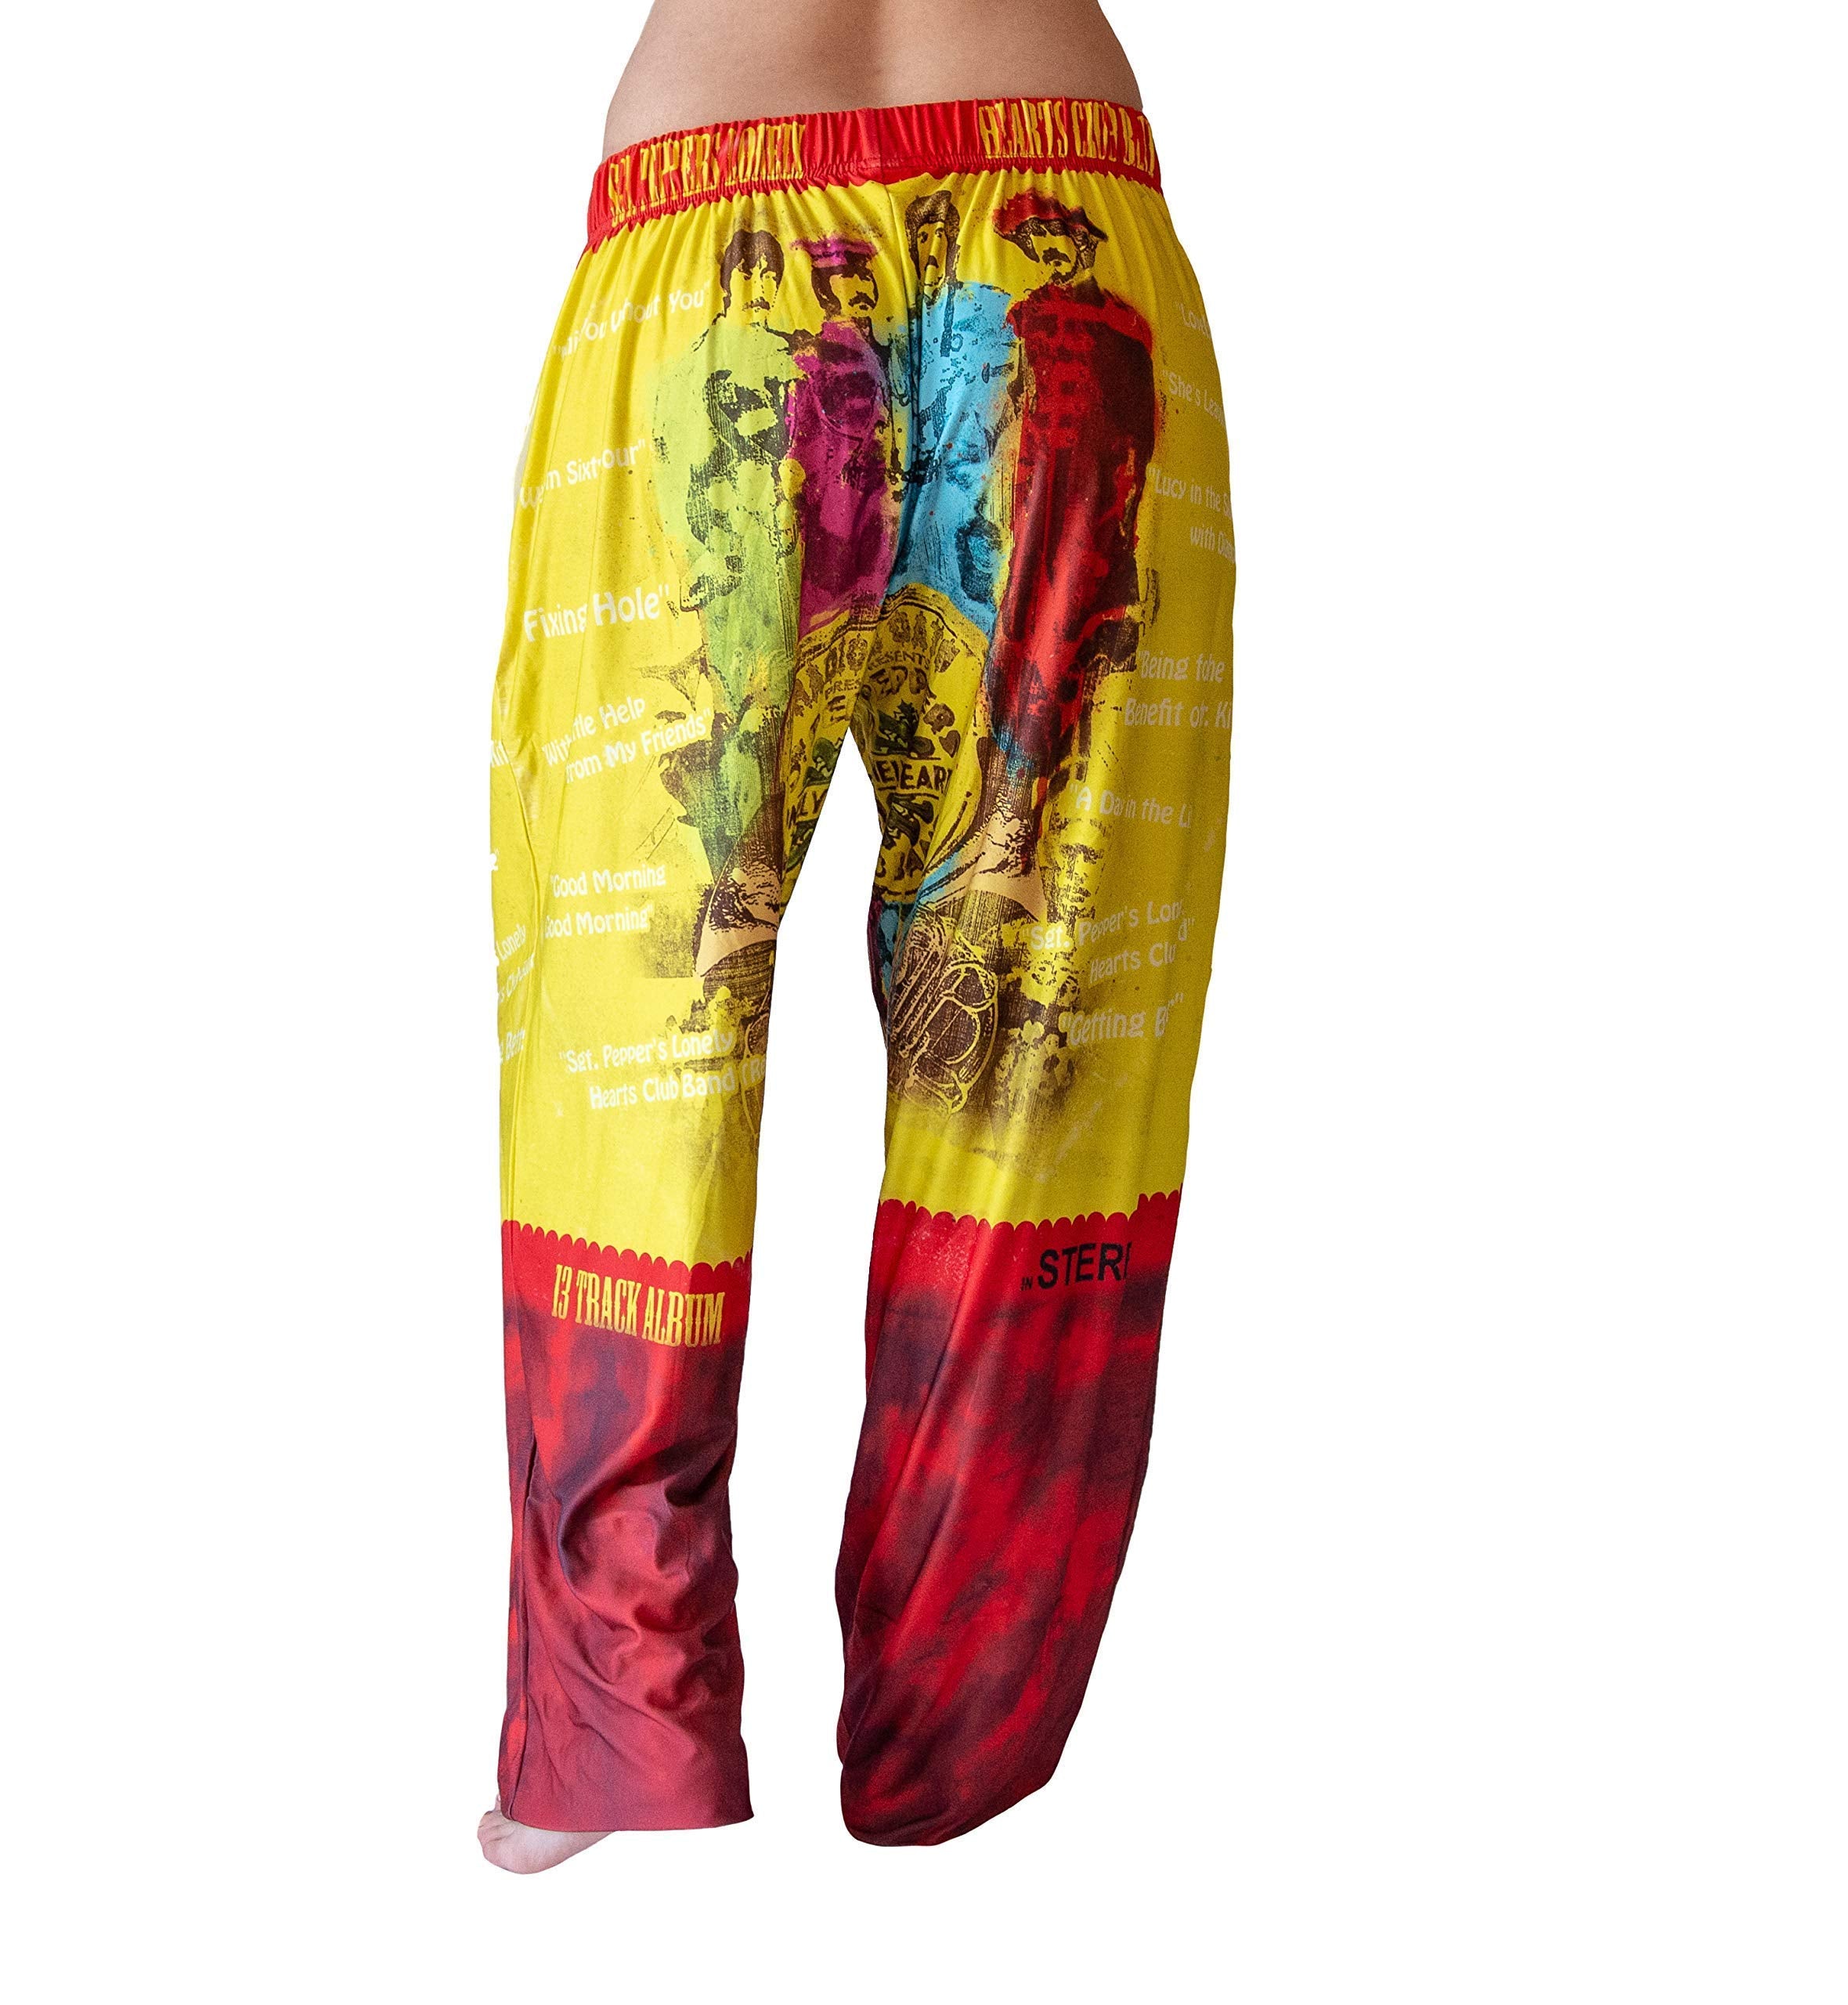 Waist down photo of model wearing Sgt. Peppers pajama lounge pants back view (white background)